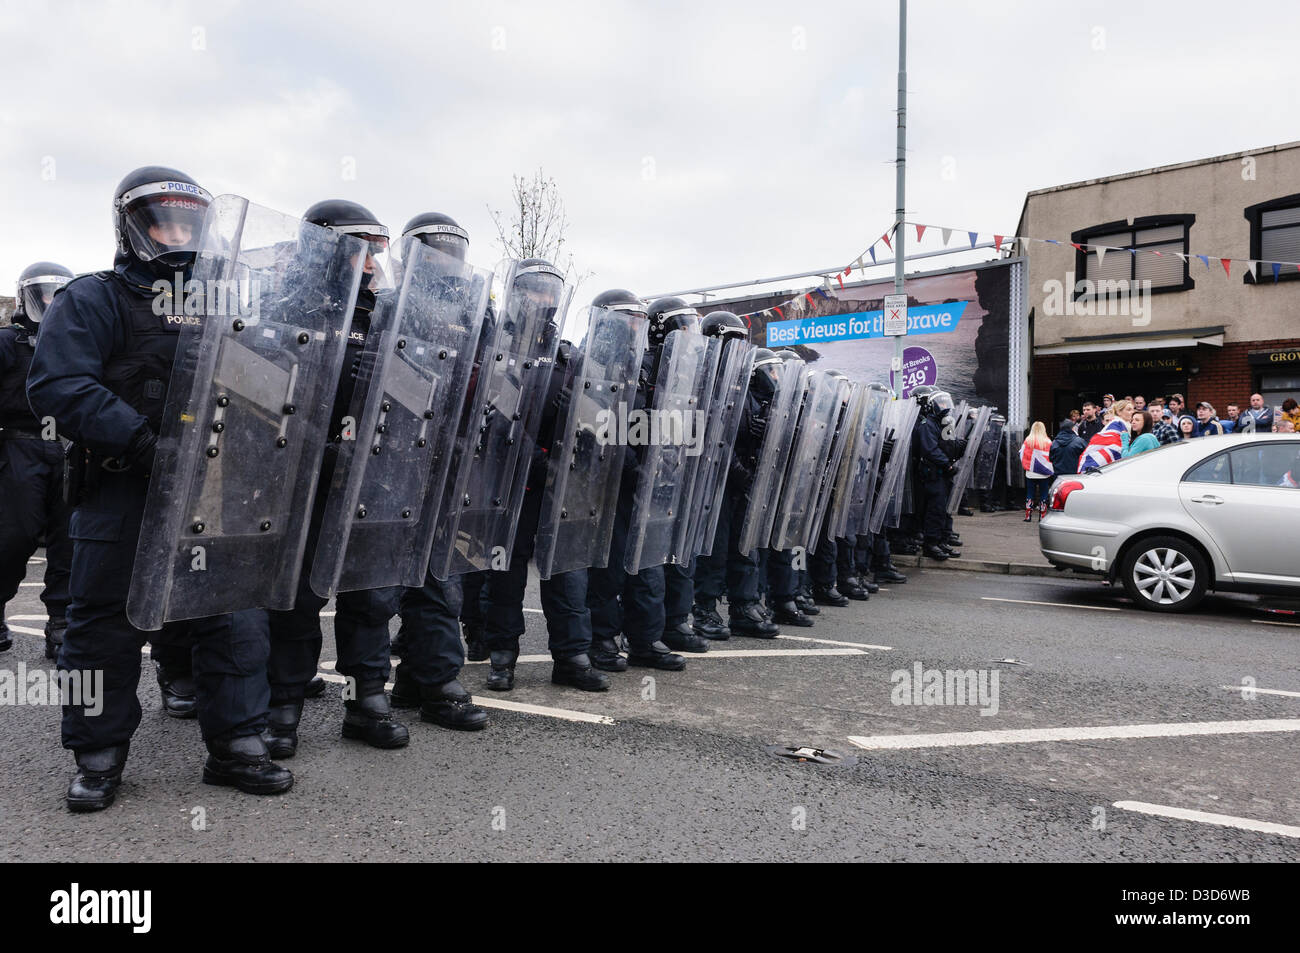 16th February 2013. Belfast, Northern Ireland.  Police dressed in riot gear advance to push a crowd of protesters back. Credit: Stephen Barnes/Alamy Live News Stock Photo